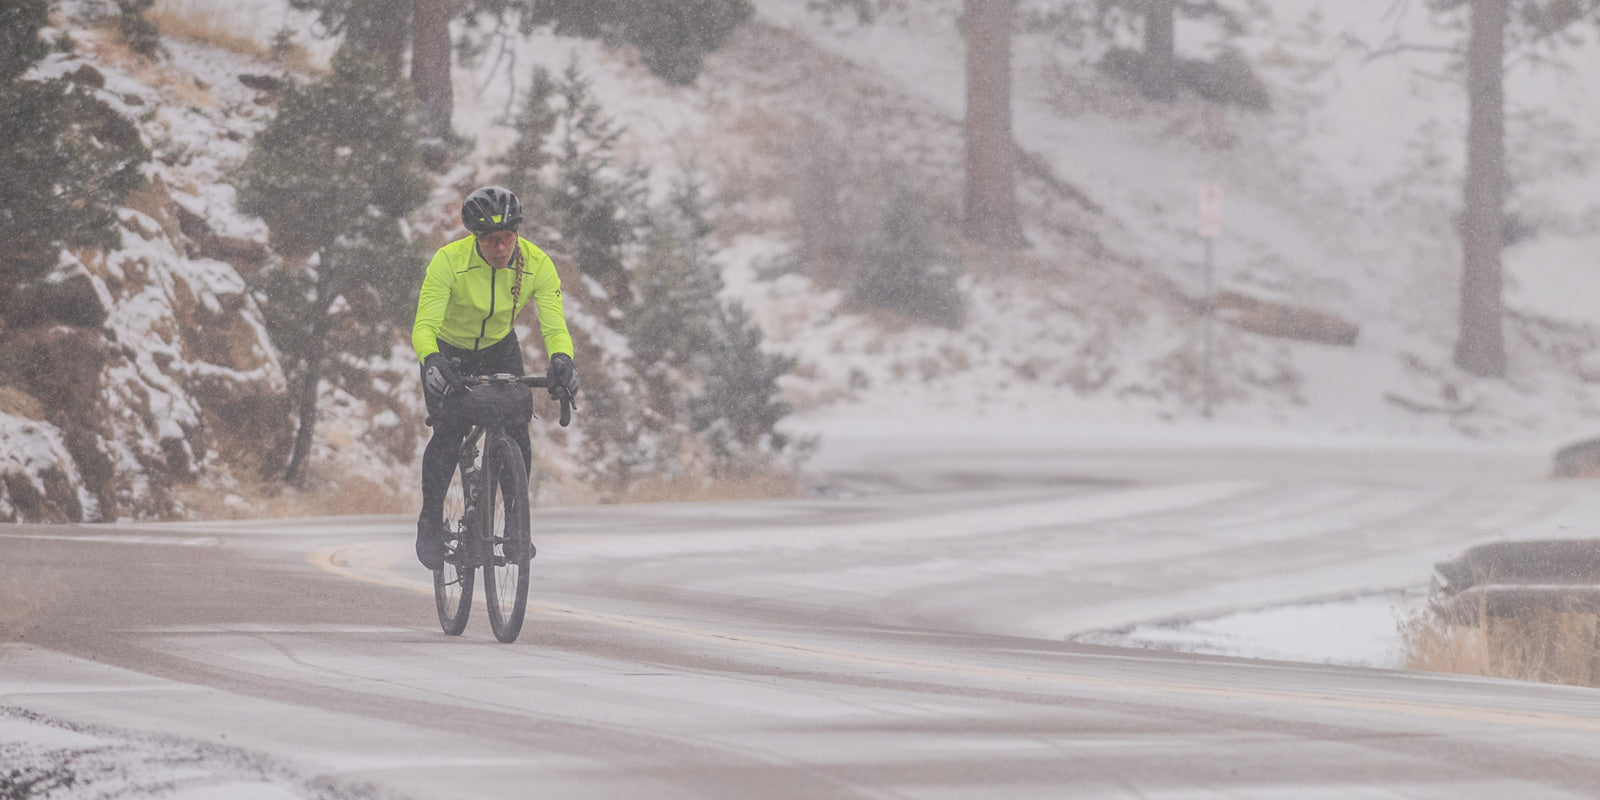 Cyclist Riding in Winter Conditions